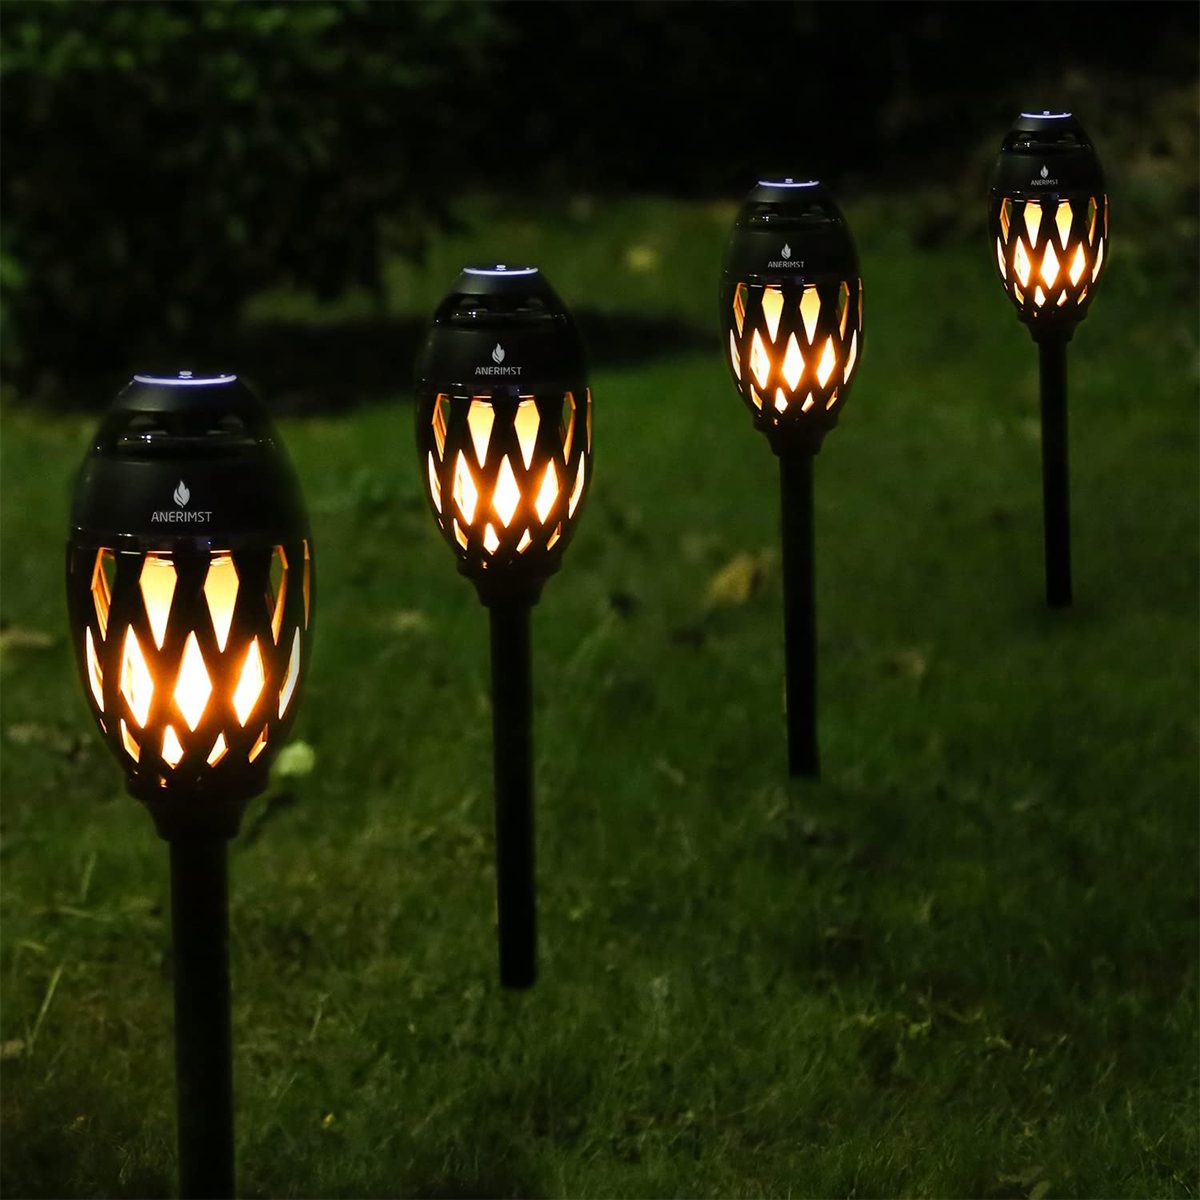 This Flameless Backyard Torch Doubles as a Bluetooth Speaker with Lights